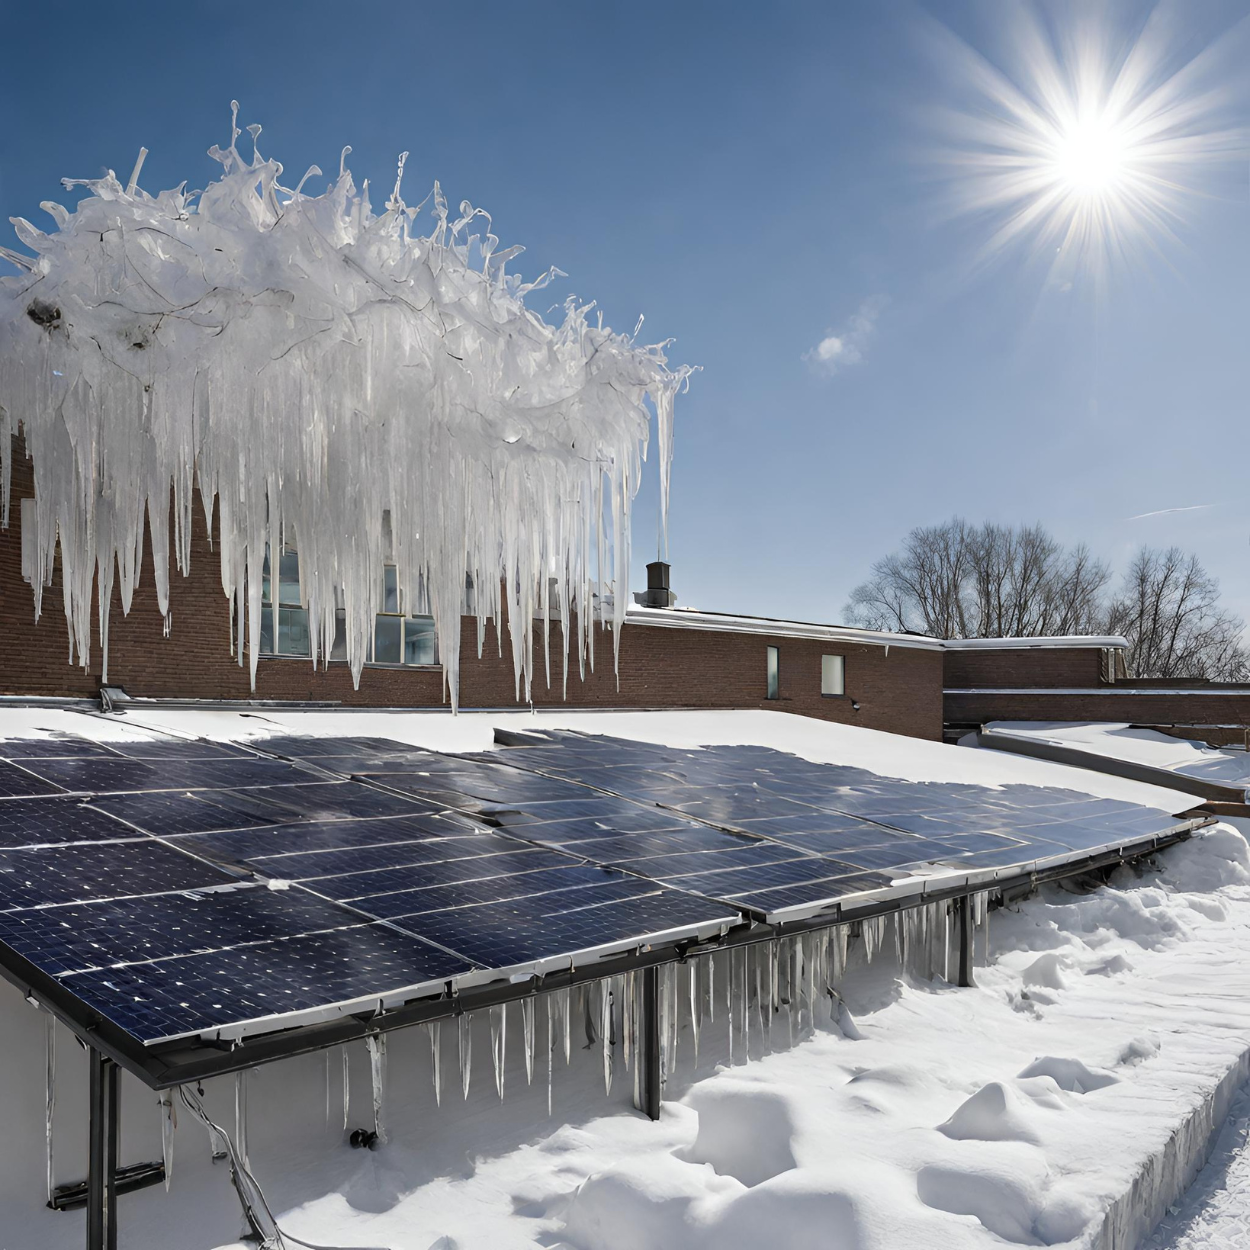 Snow on solar panels generally melts more quickly than on surrounding areas.